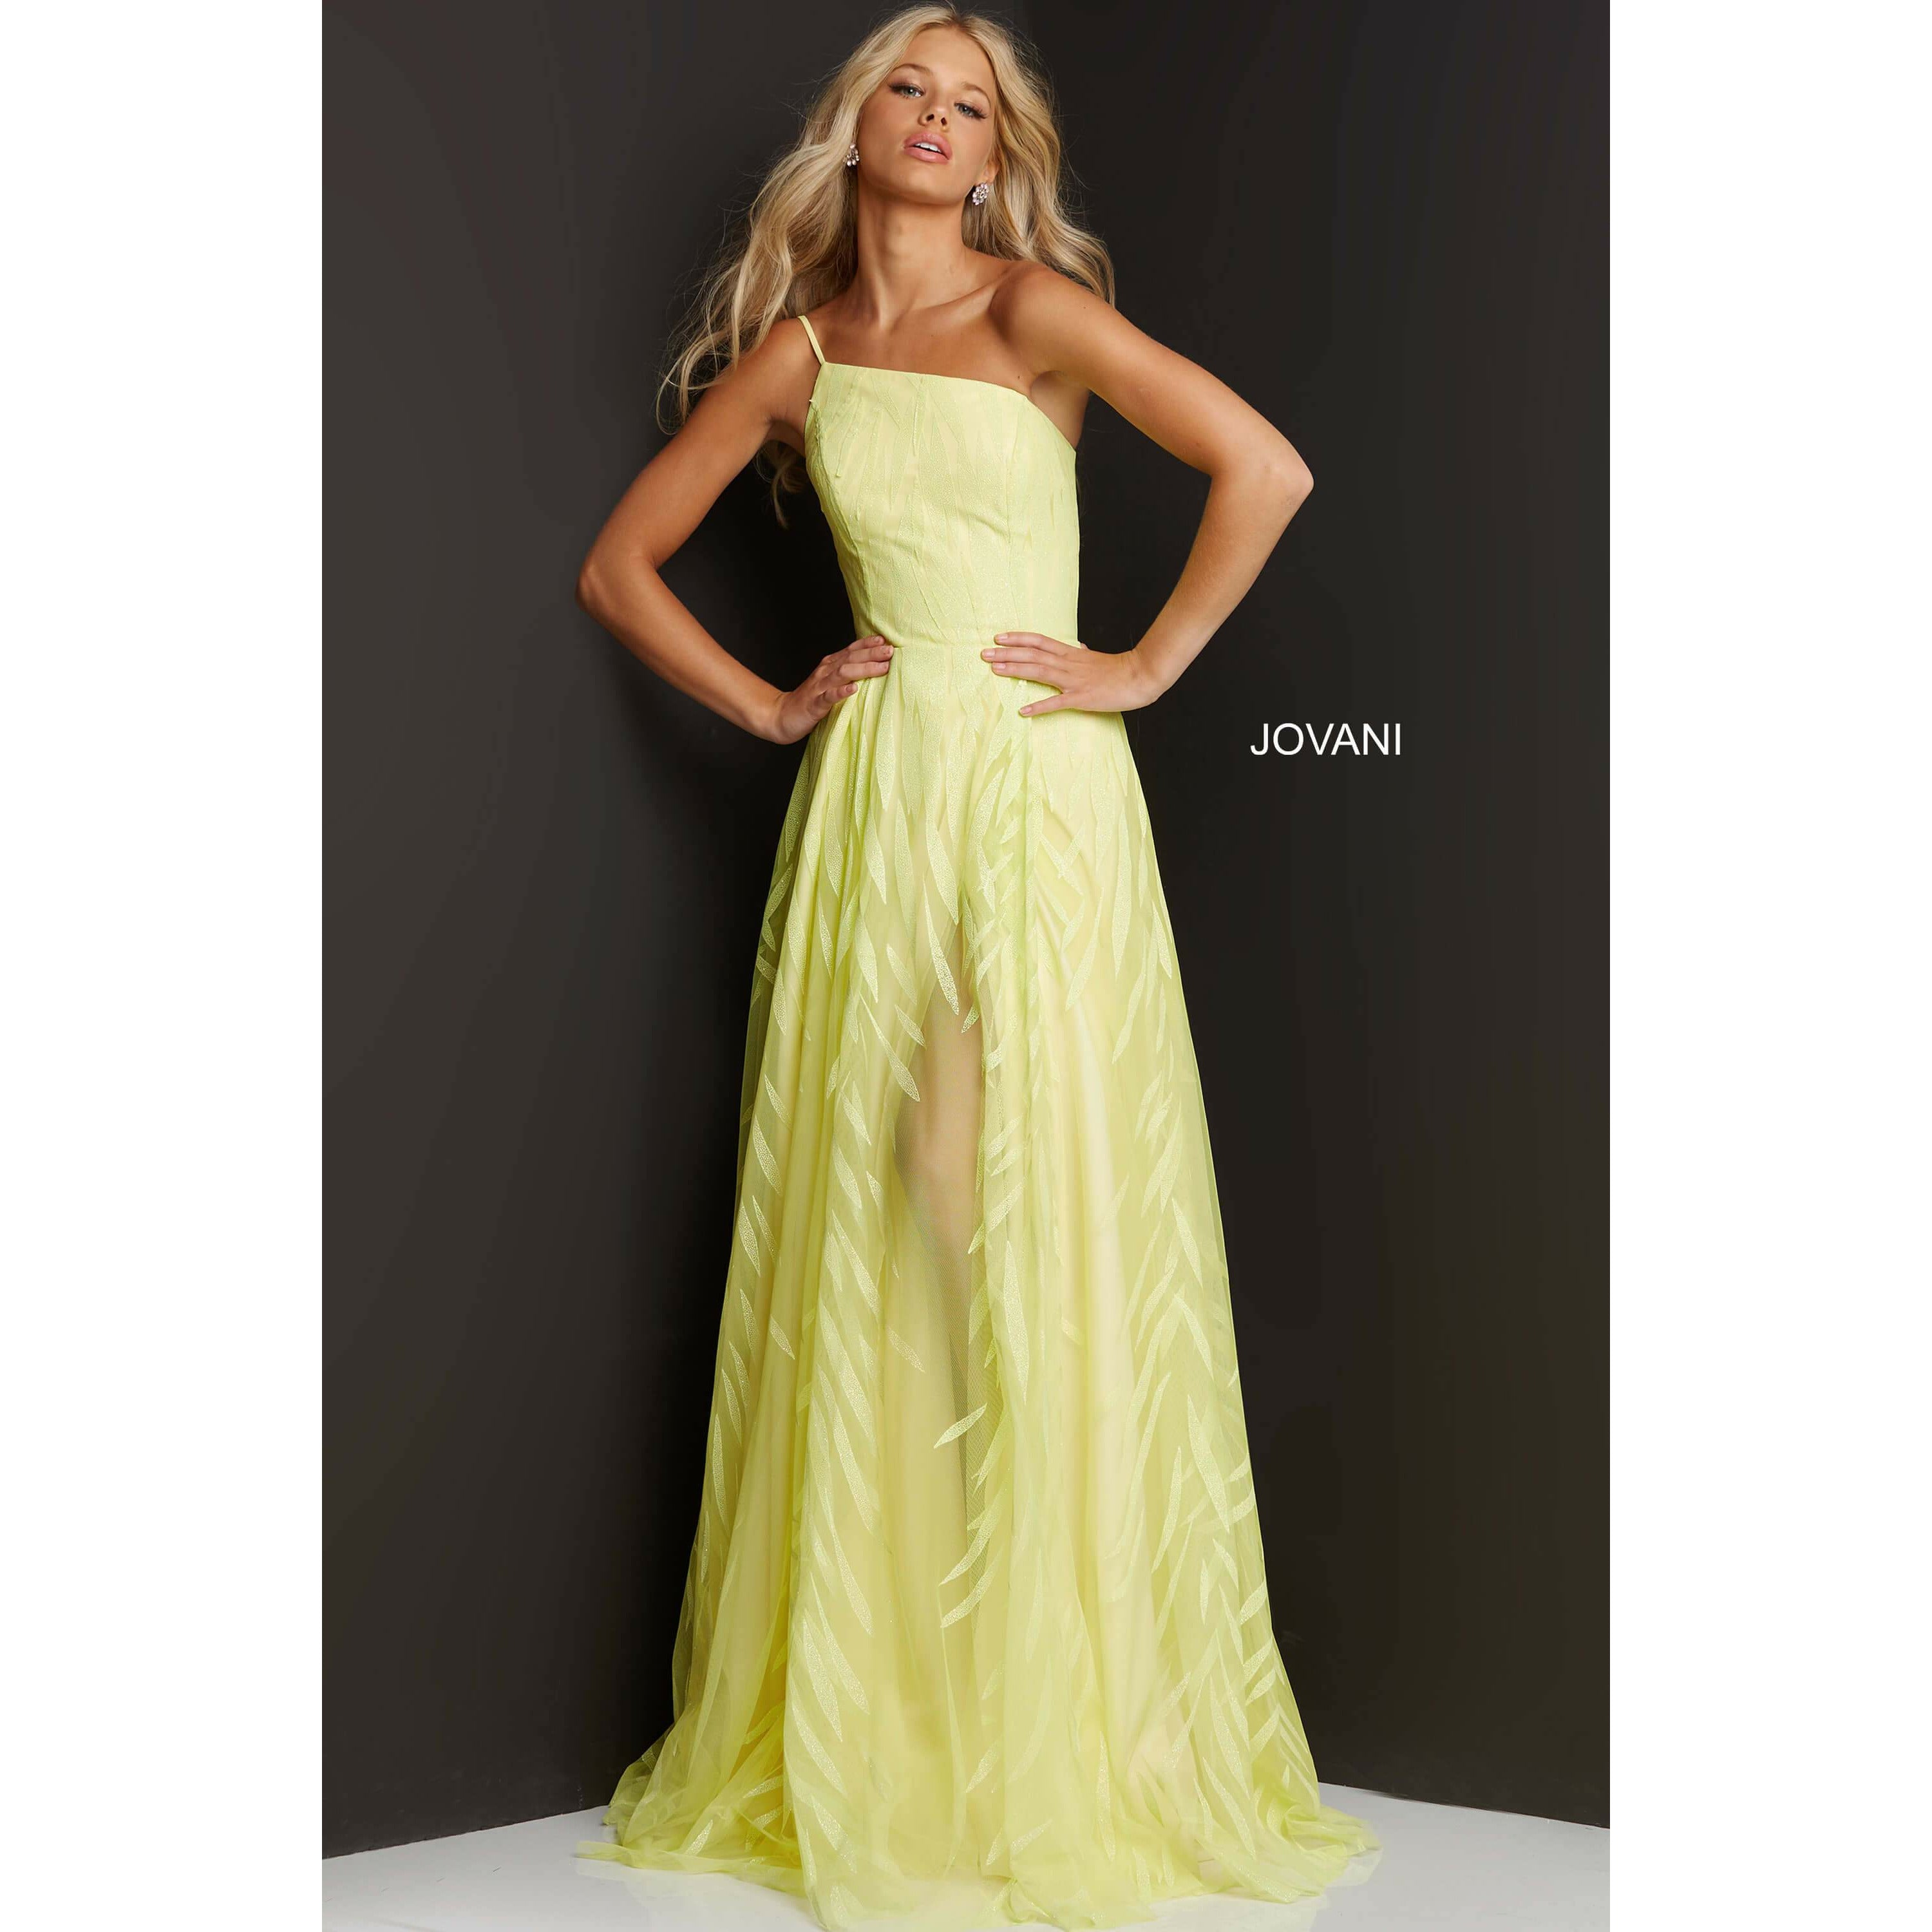 yellow prom dress one shoulder